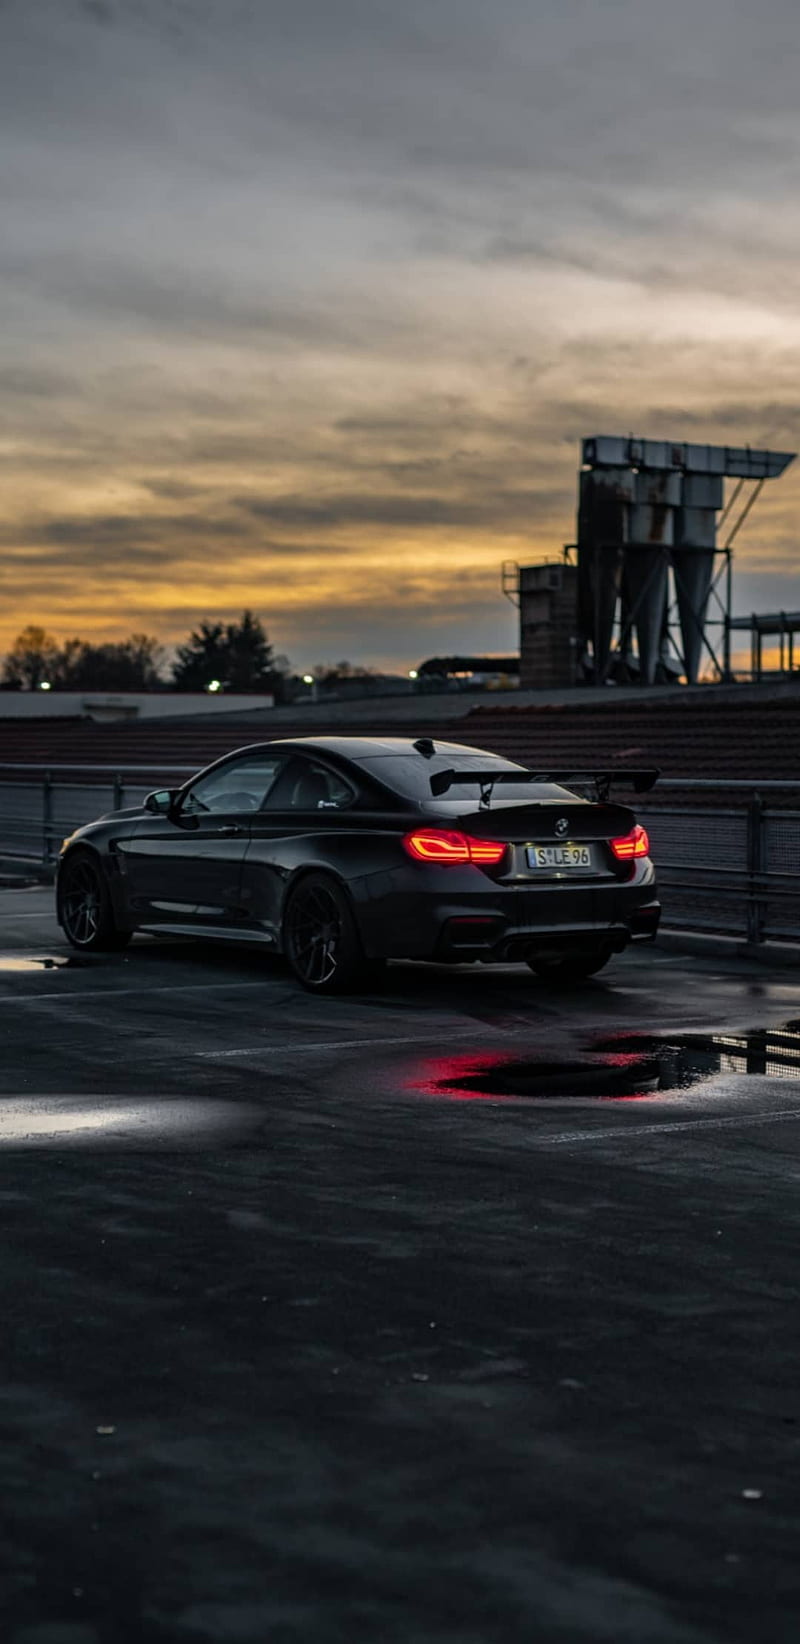 A black BMW car parked on a parking lot during sunset - BMW